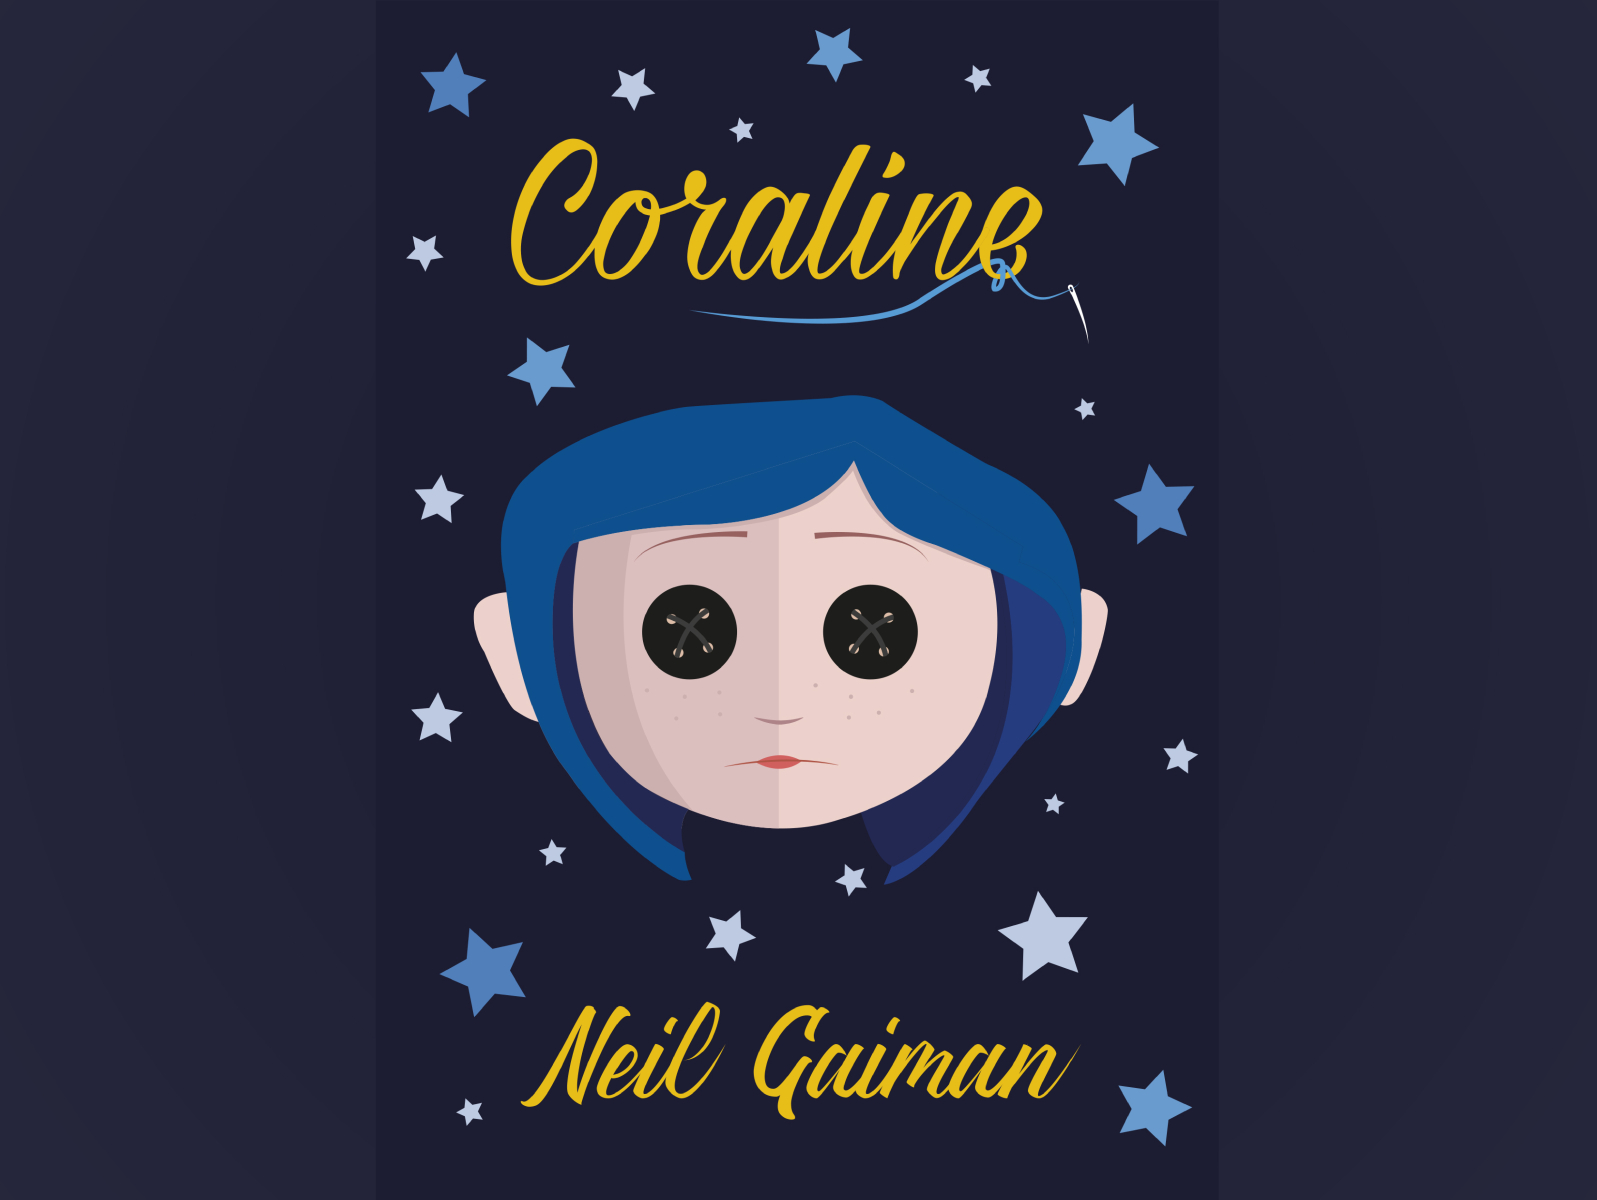 Coraline - book cover by Julia on Dribbble